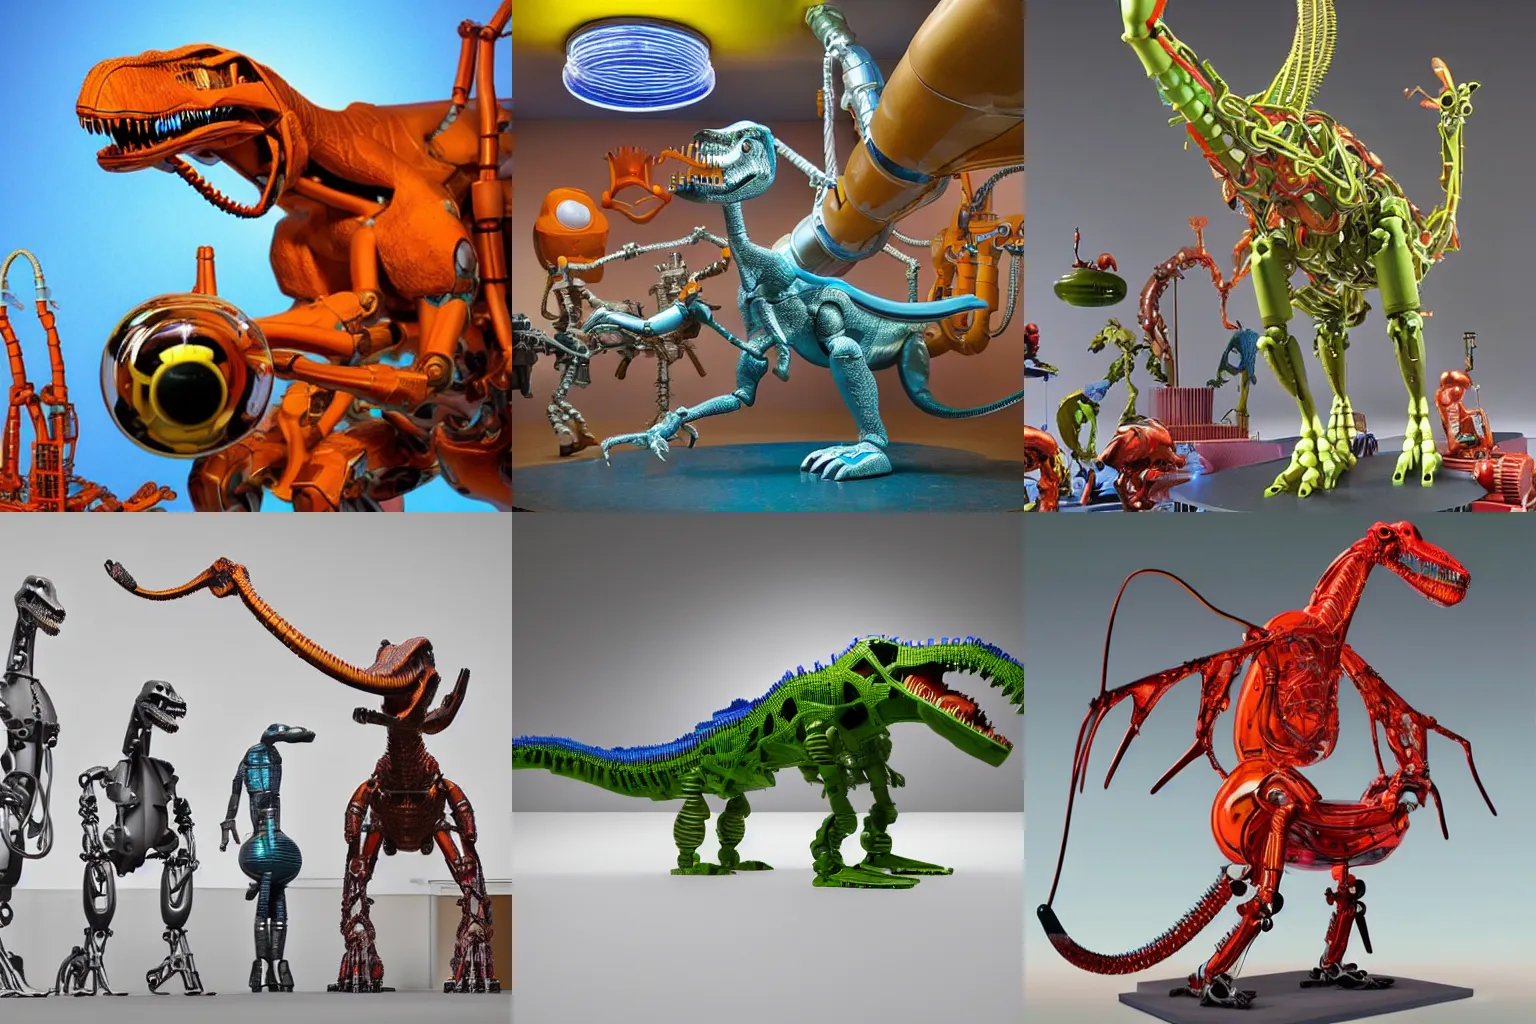 Prompt: A propaganda, plastic simple funny mechanic organic mechabot dinosaur characterdesign toy sculpture made from chrome cables, wires and tubes by moebius, by david lachapelle, by angus mckie, by rhads, by jeff koons, in an empty studio hollow, c4d